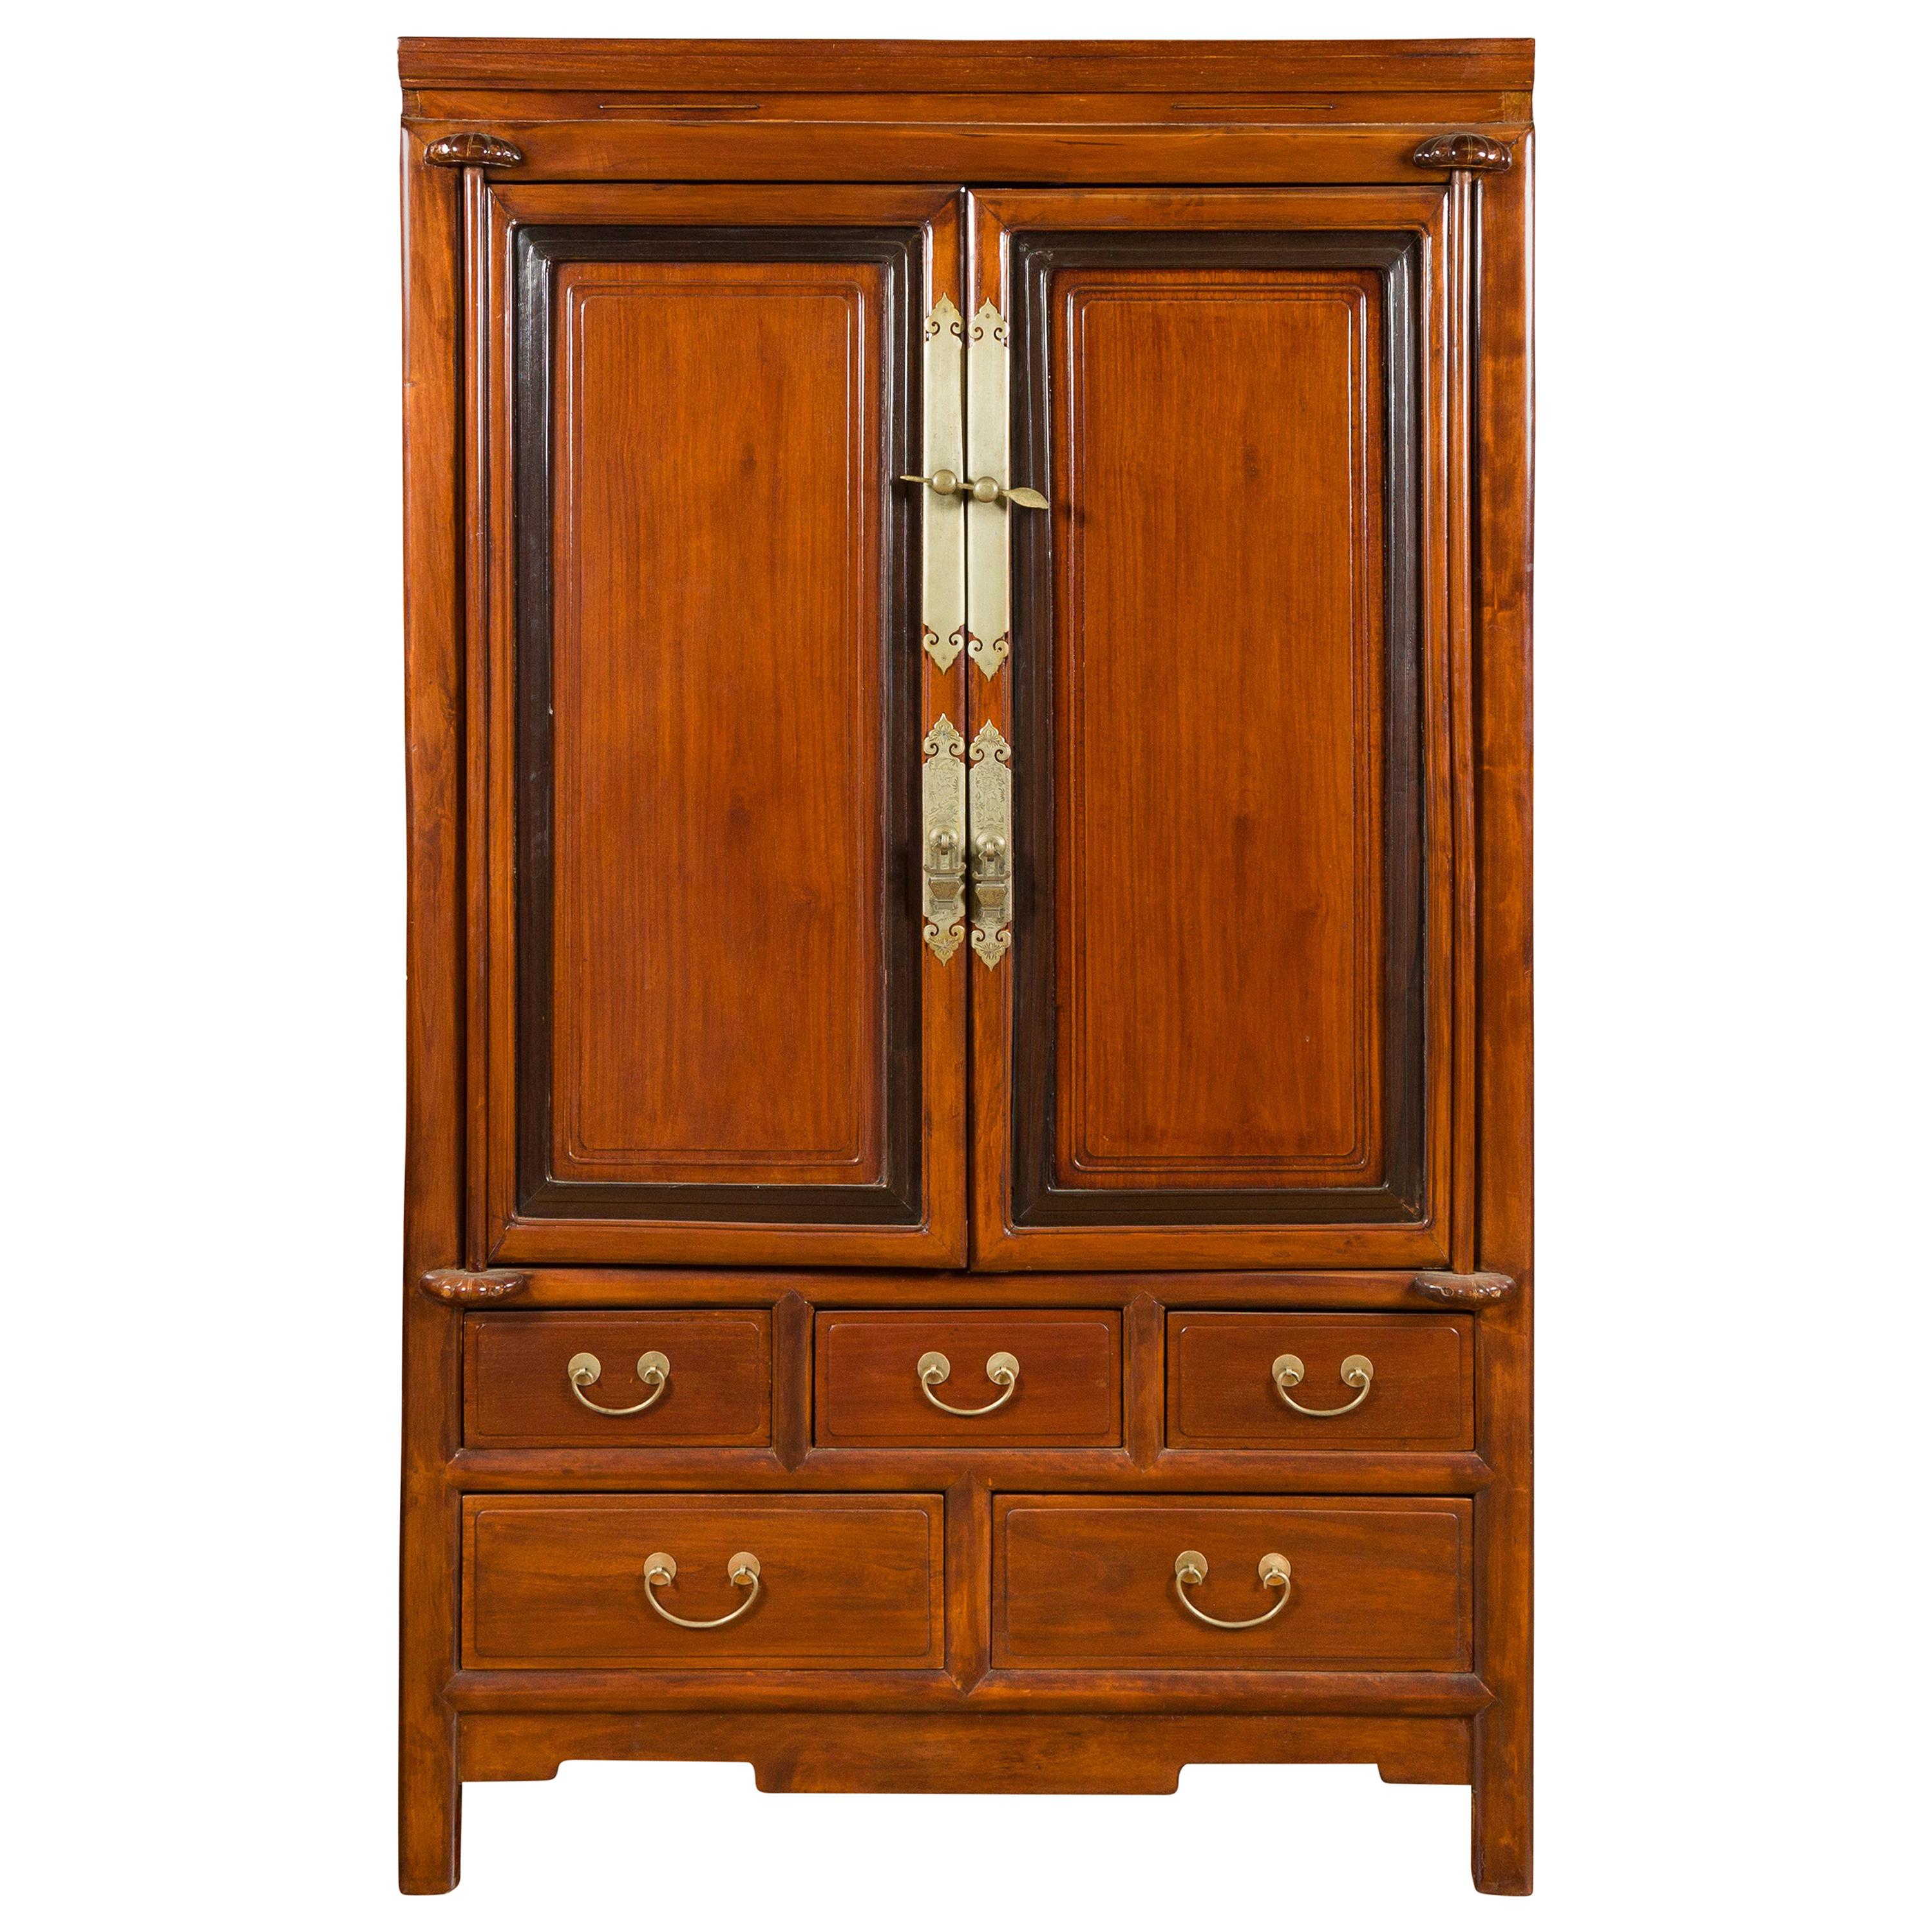 Two-Toned Cabinet with Doors and Five Drawers with Etched Brass Hardware